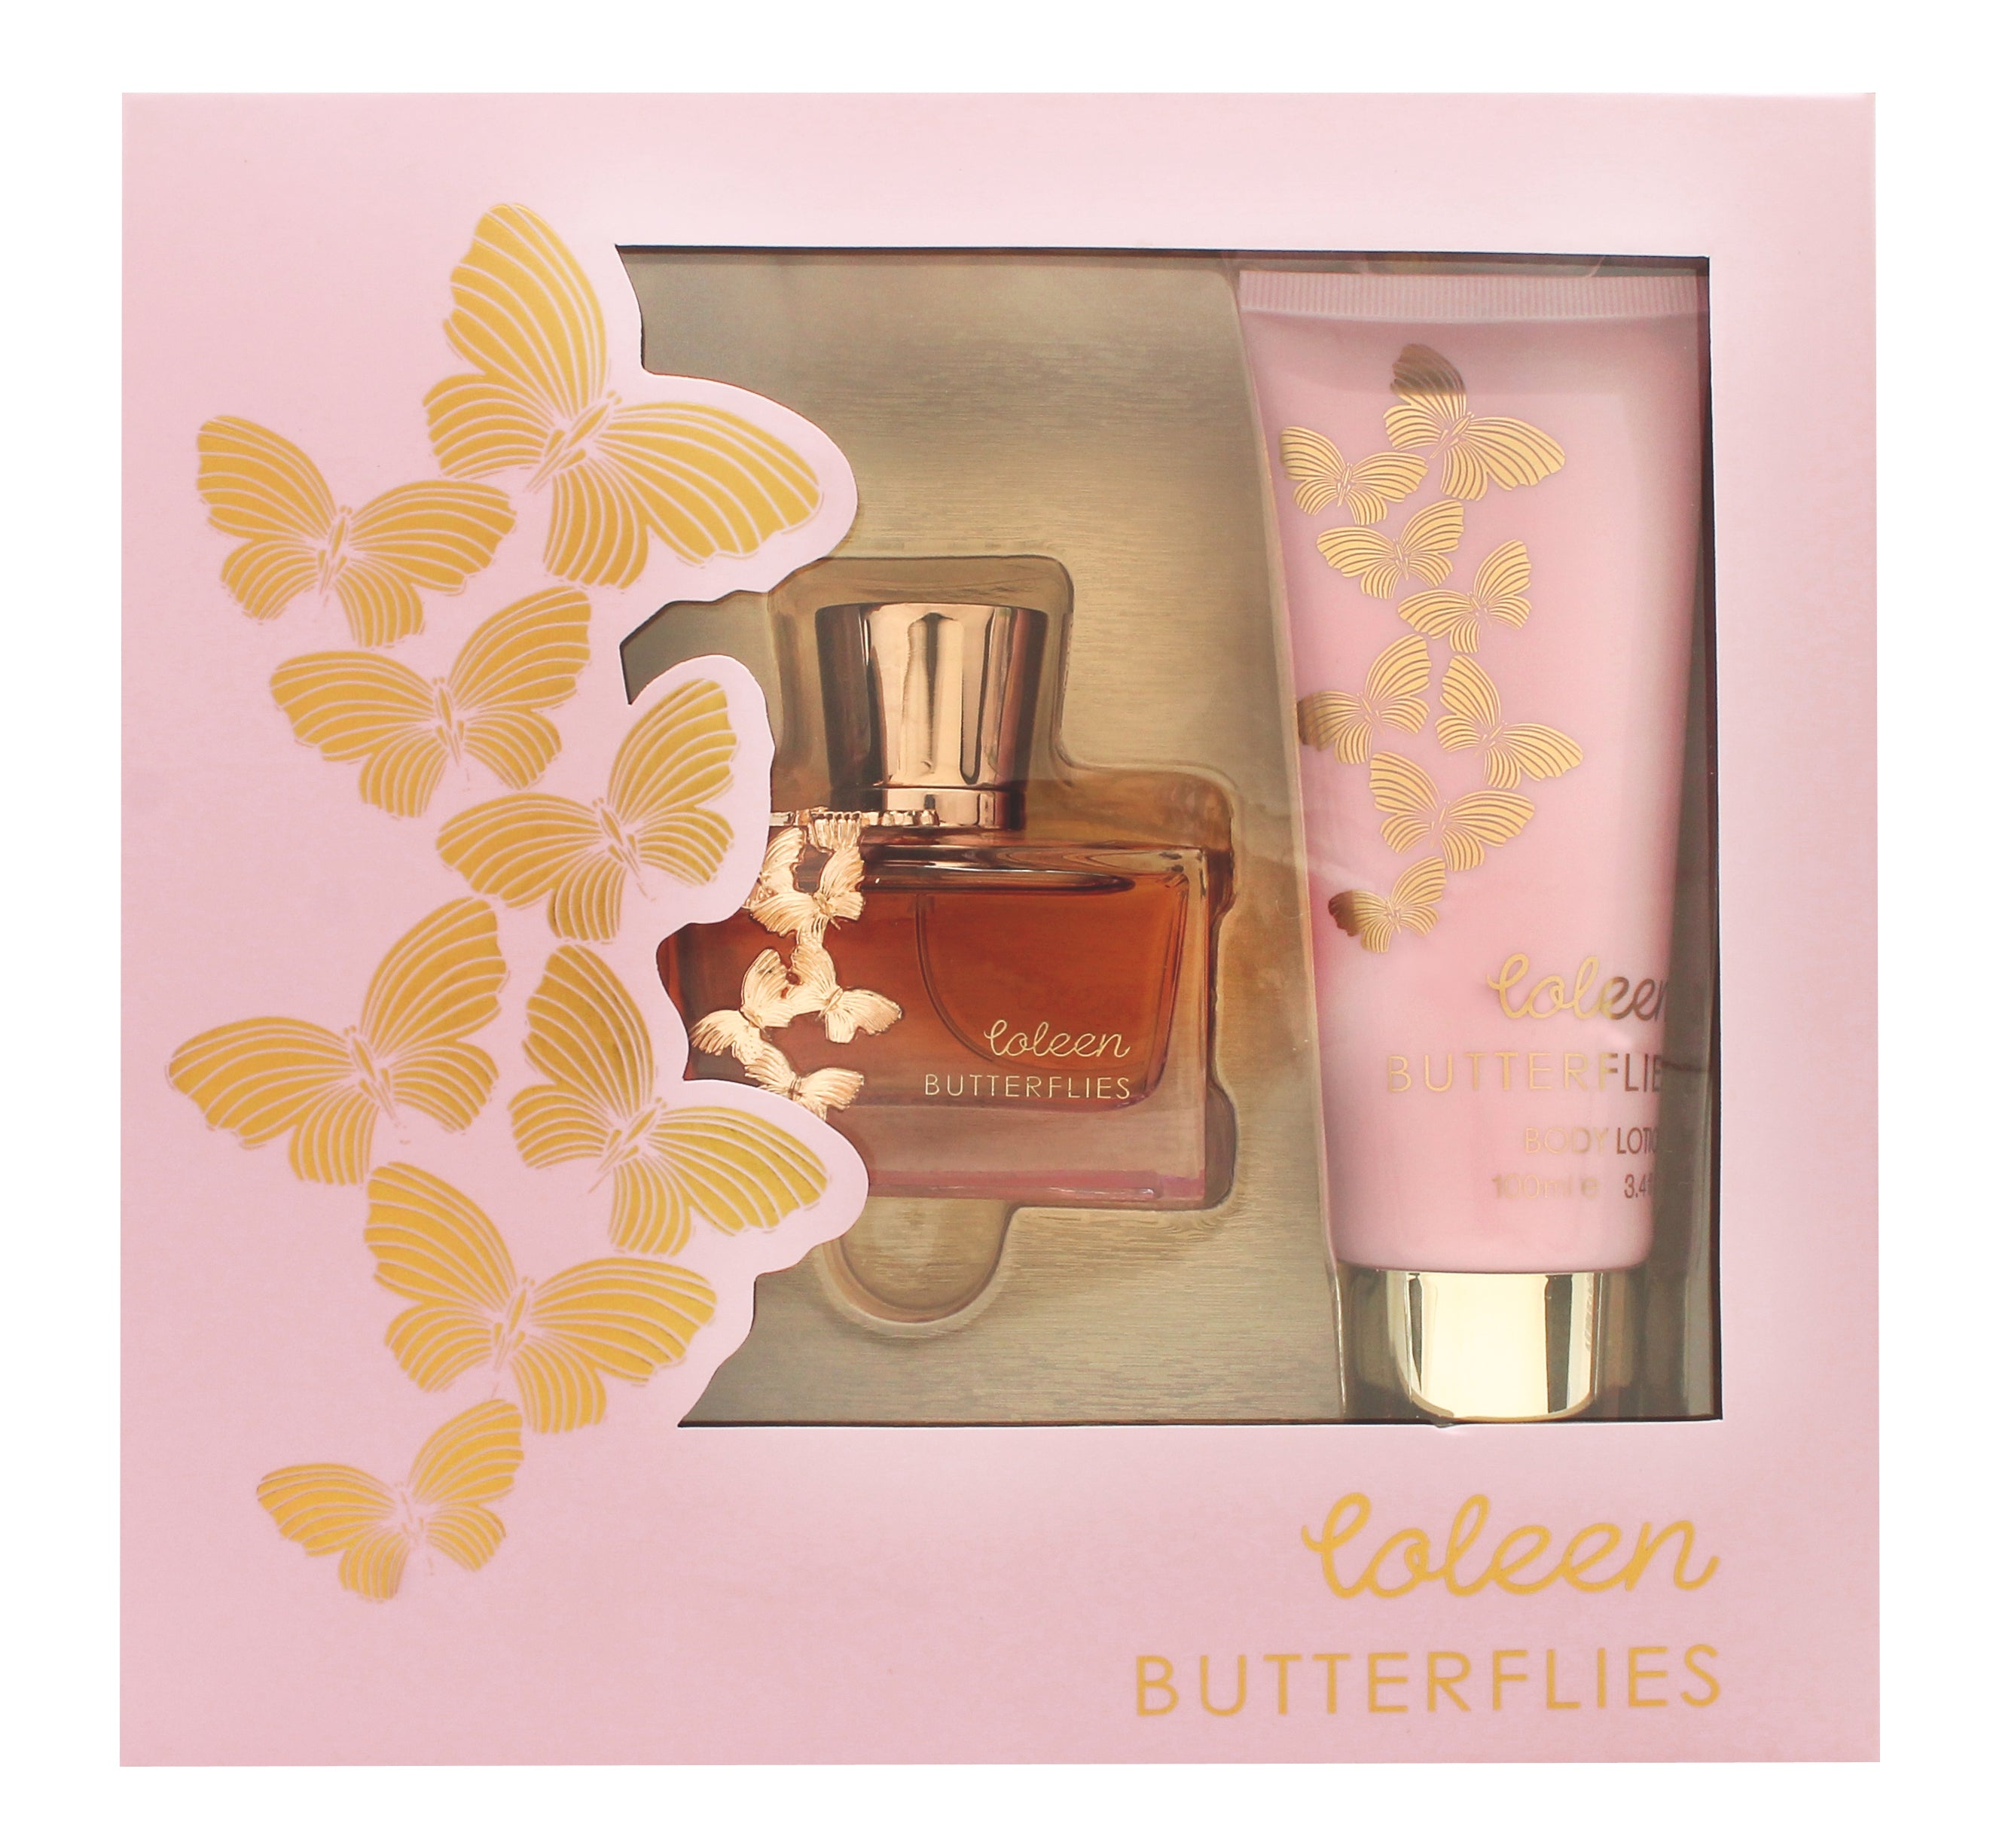 View Coleen Rooney Butterflies Gift Set 50ml EDT 100ml Body Lotion information